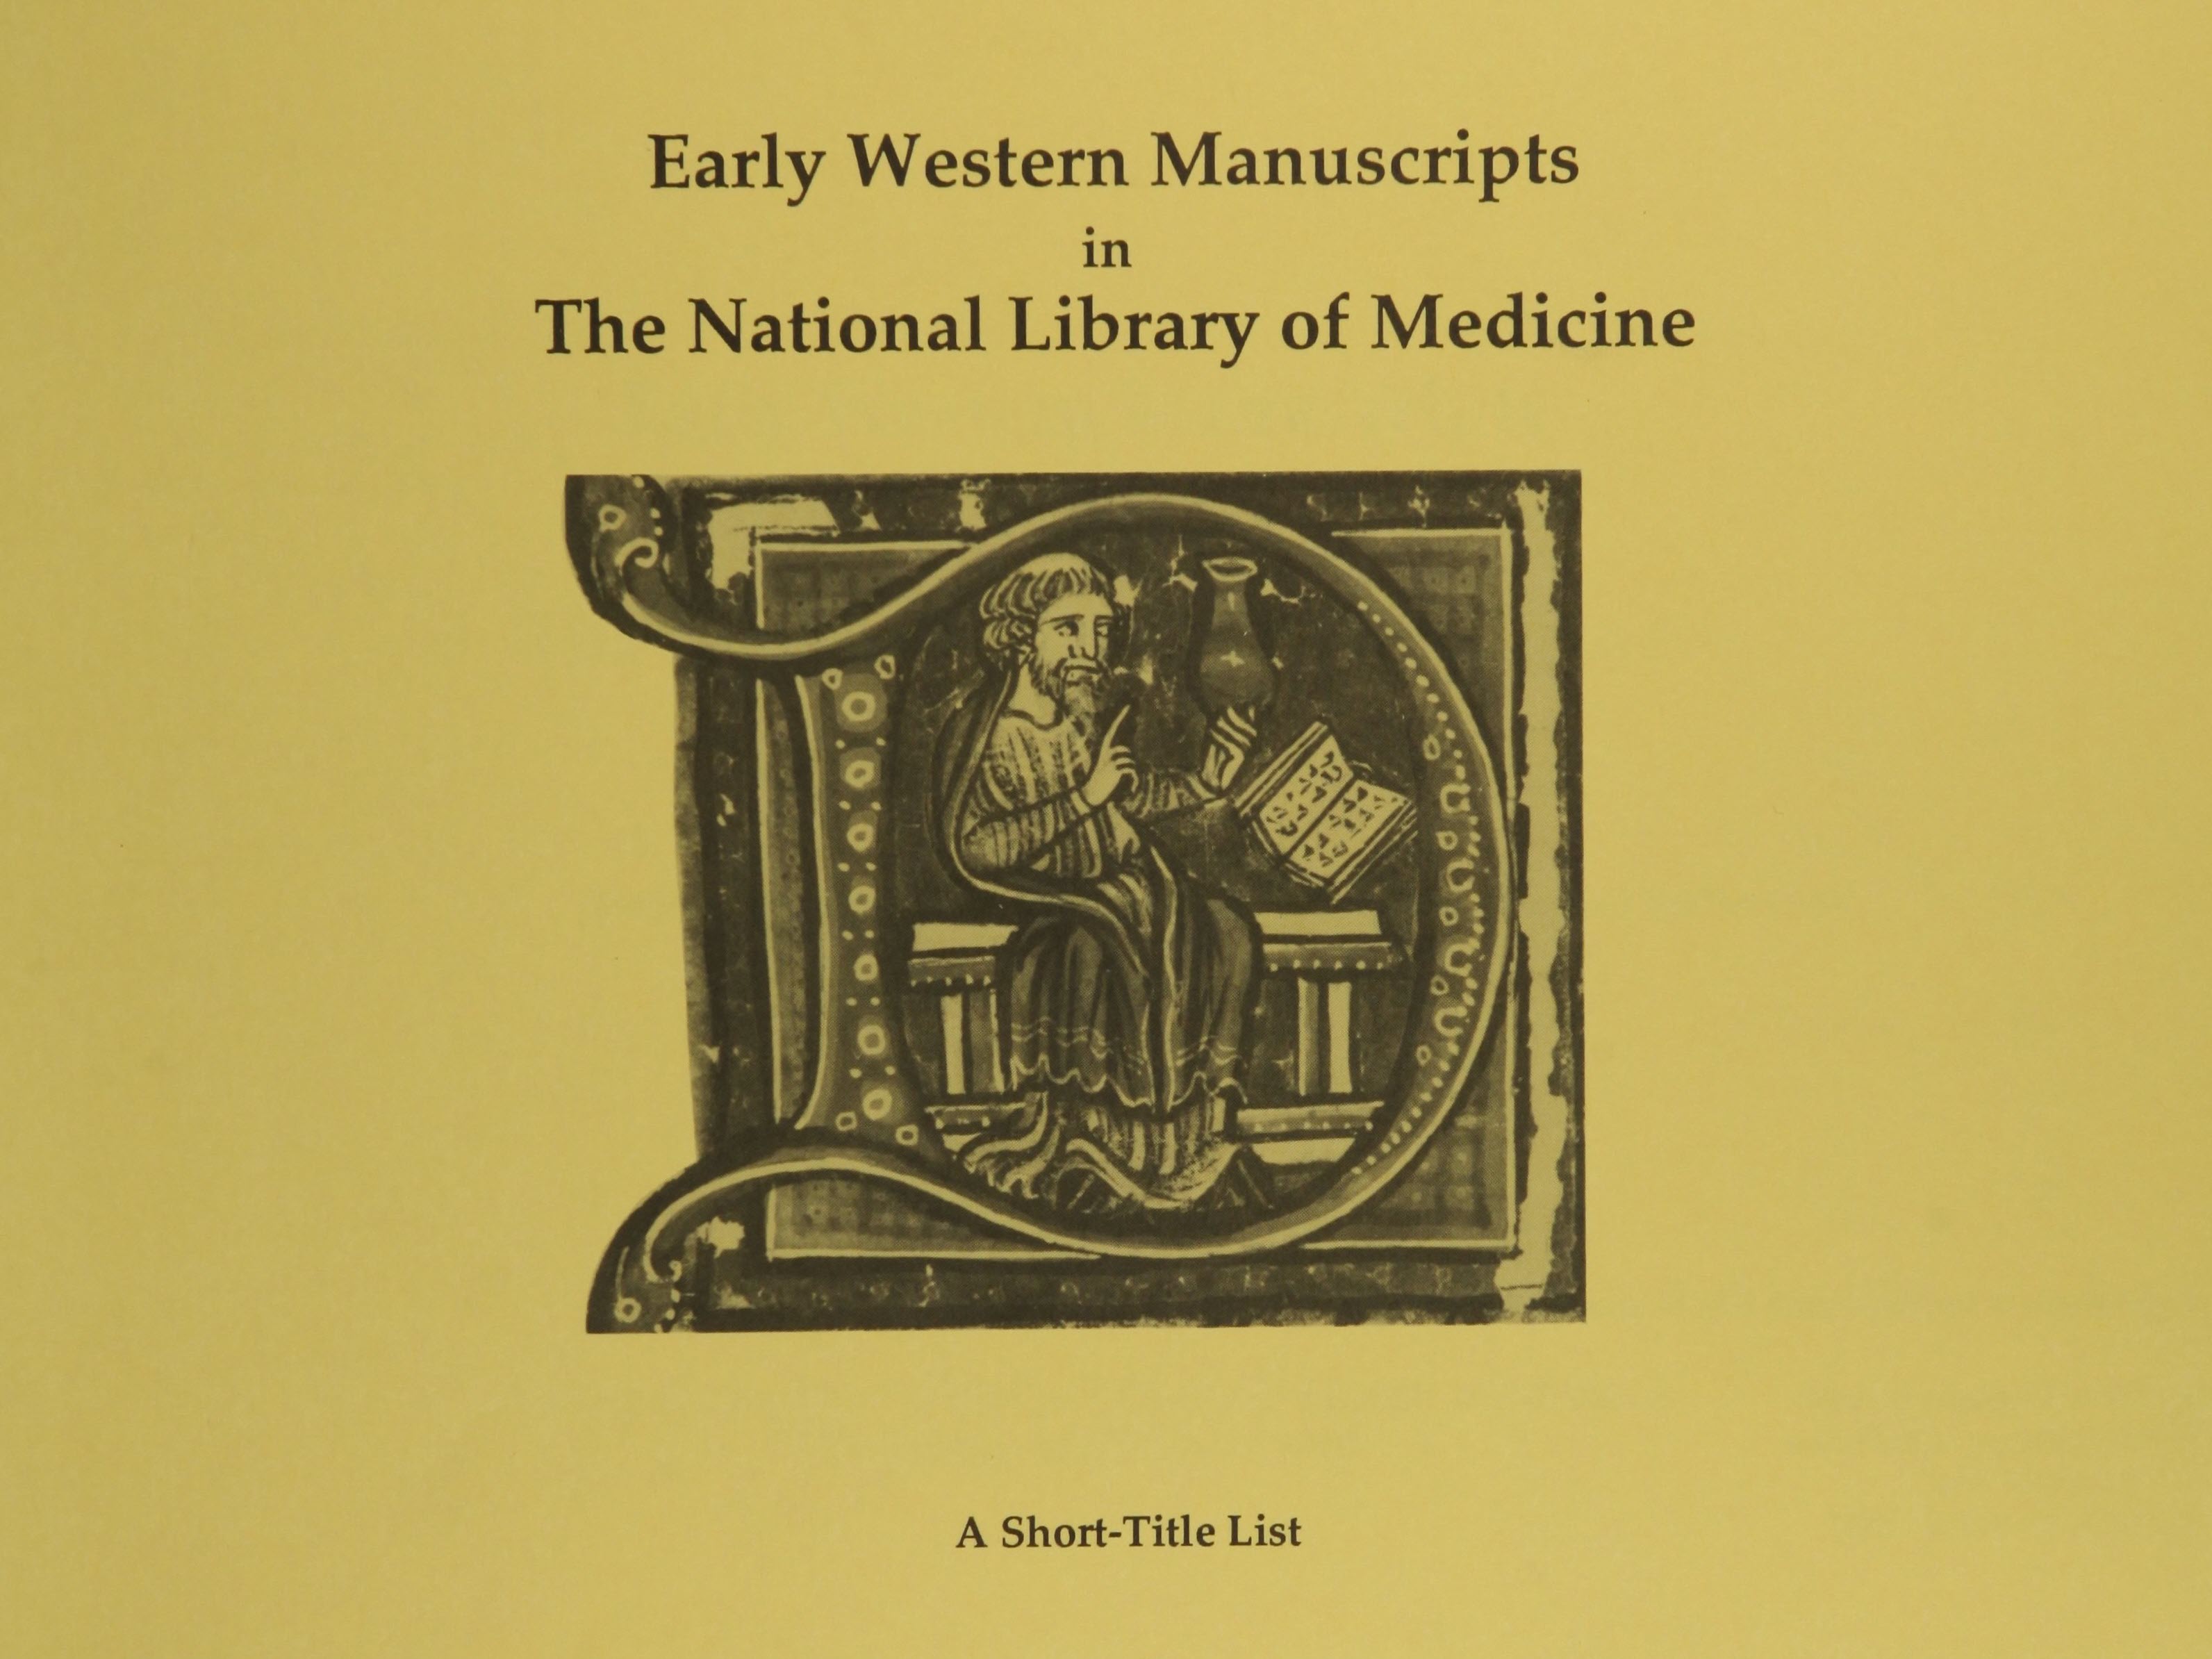 Cover of Early Western Manuscripts Short-List